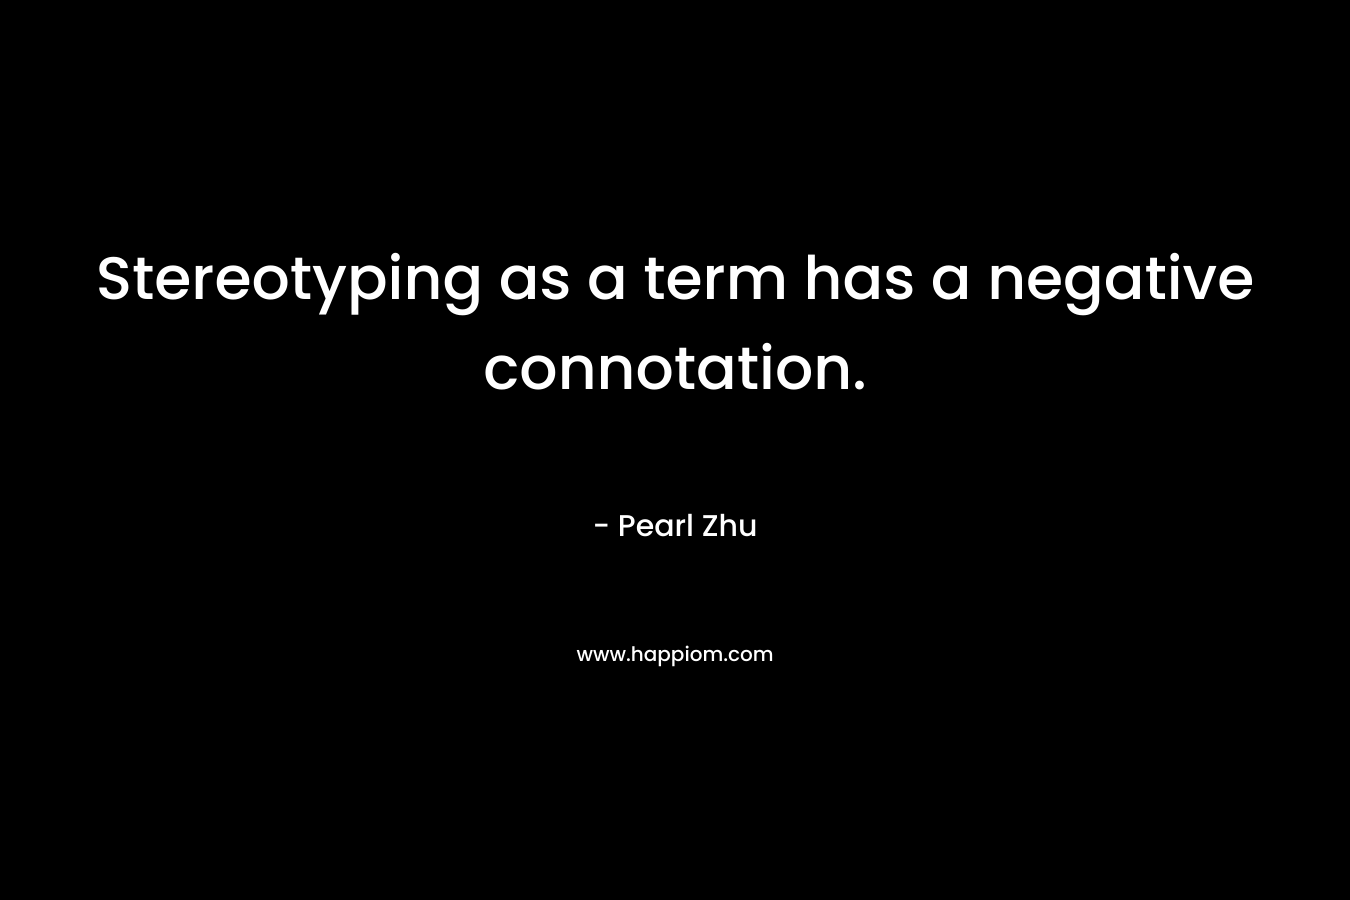 Stereotyping as a term has a negative connotation. – Pearl Zhu